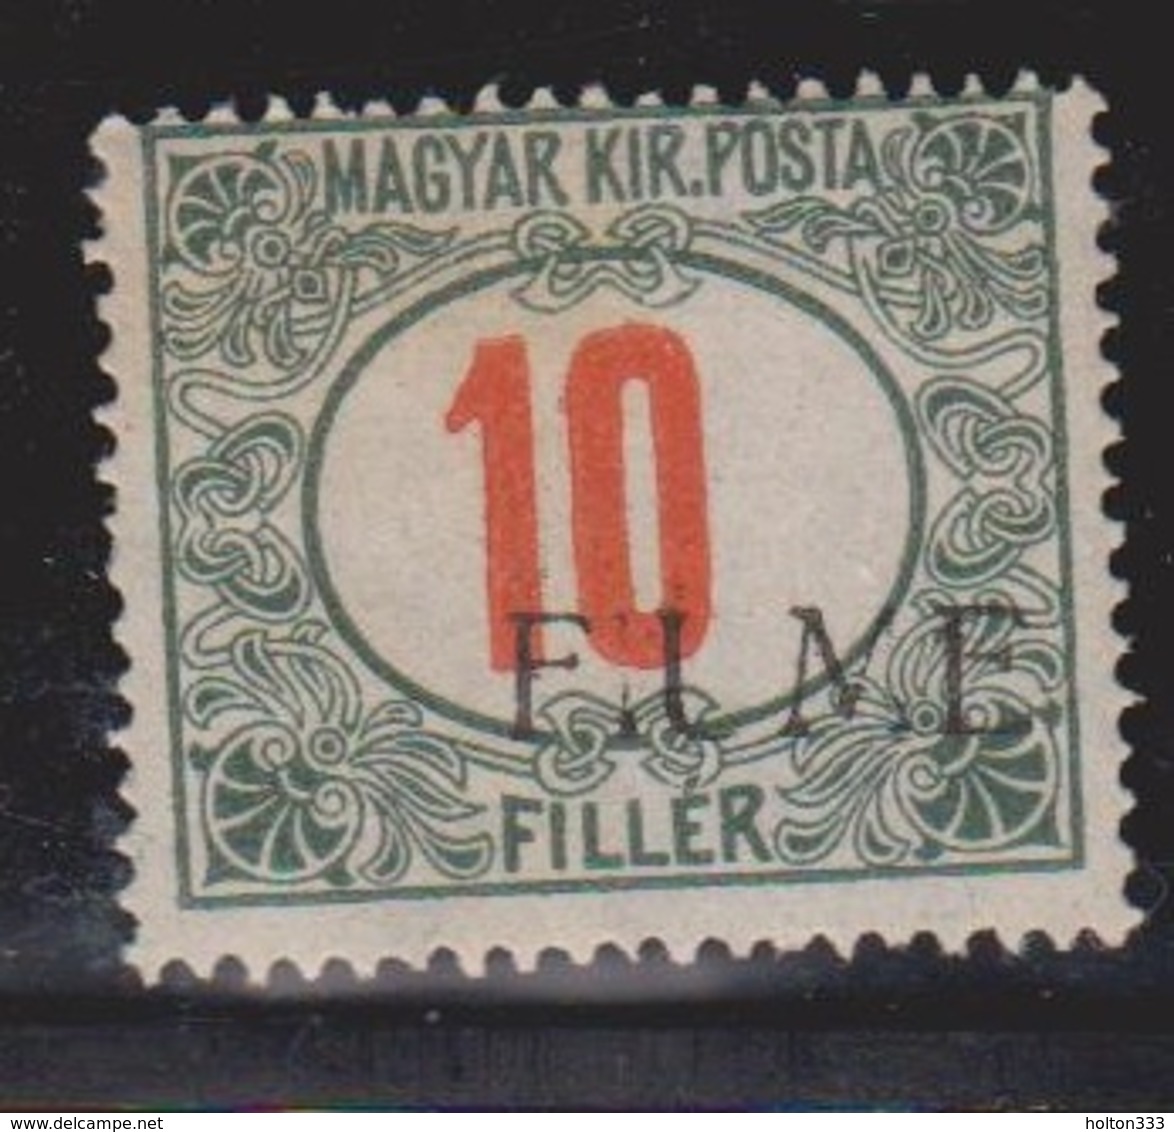 FIUME Scott # J8c MH - Overprint On Stamp Of Hungary - Fiume